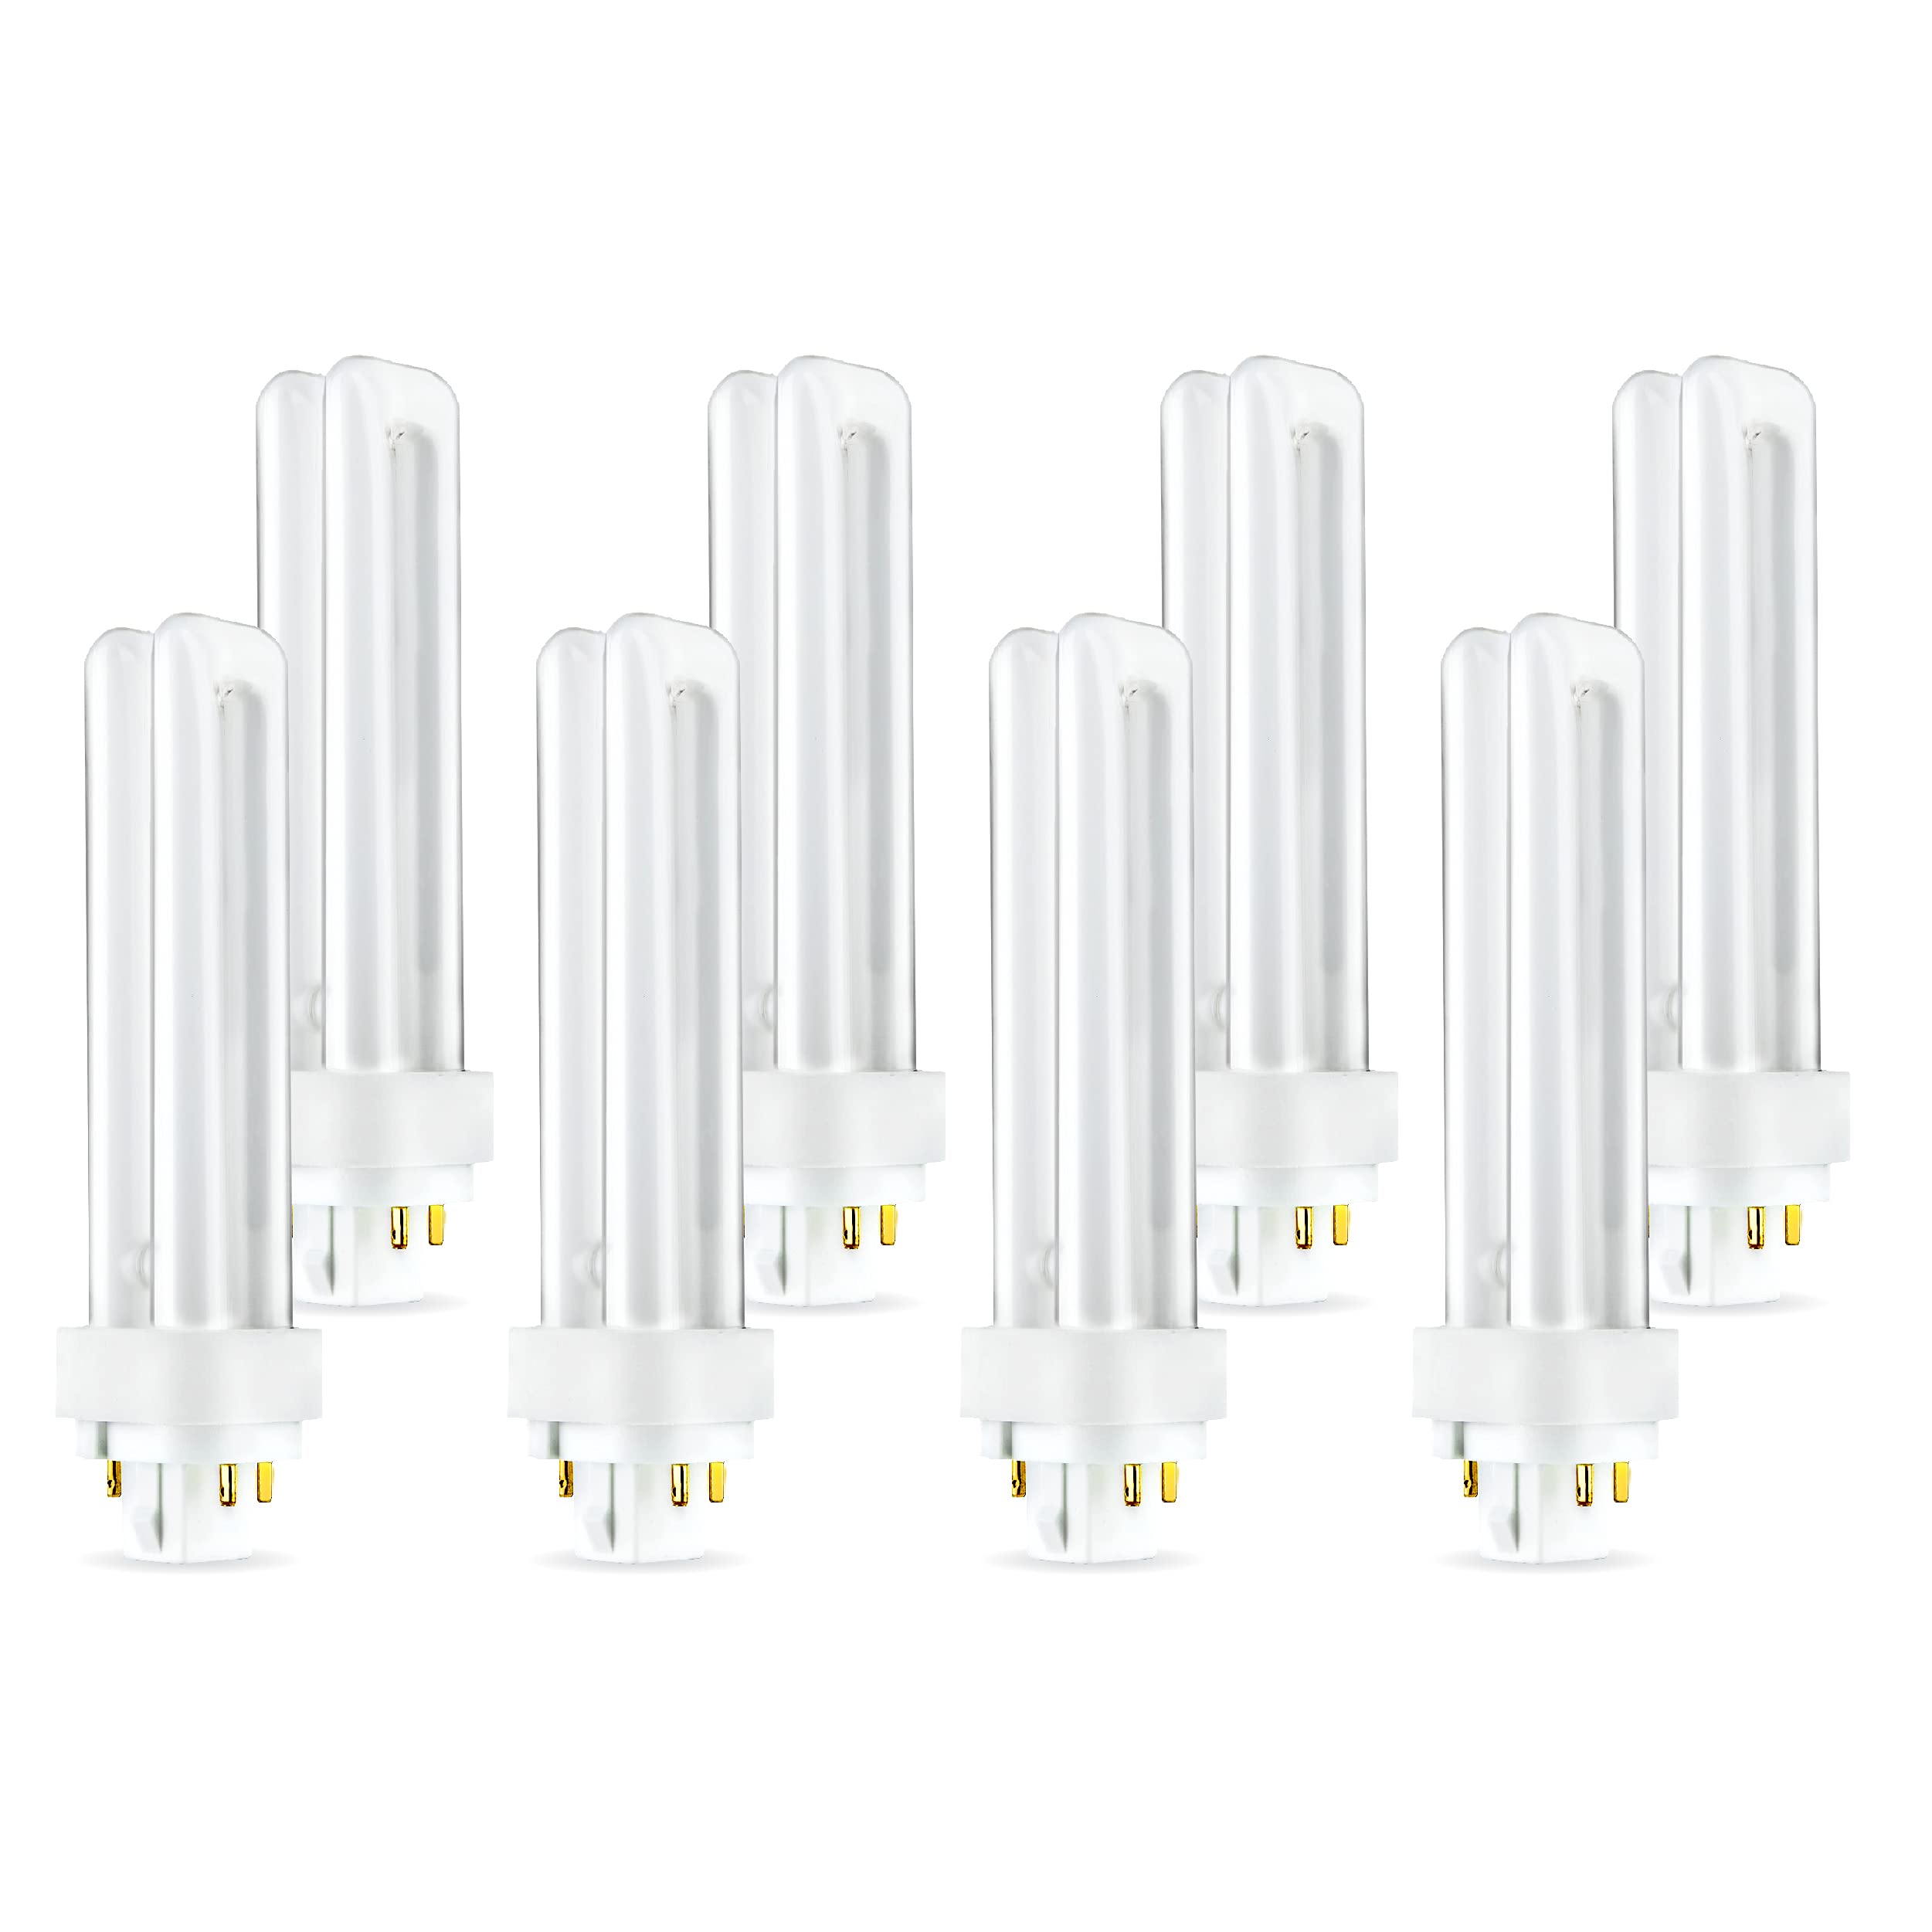 (8 Pack) PLC-13W 835, 4 Pin G24q-1, 13 Watt Double Tube, Compact Fluorescent Light Bulb, Replaces Philips 38327-3, GE 97596 and Sylvania 20671  - Like New